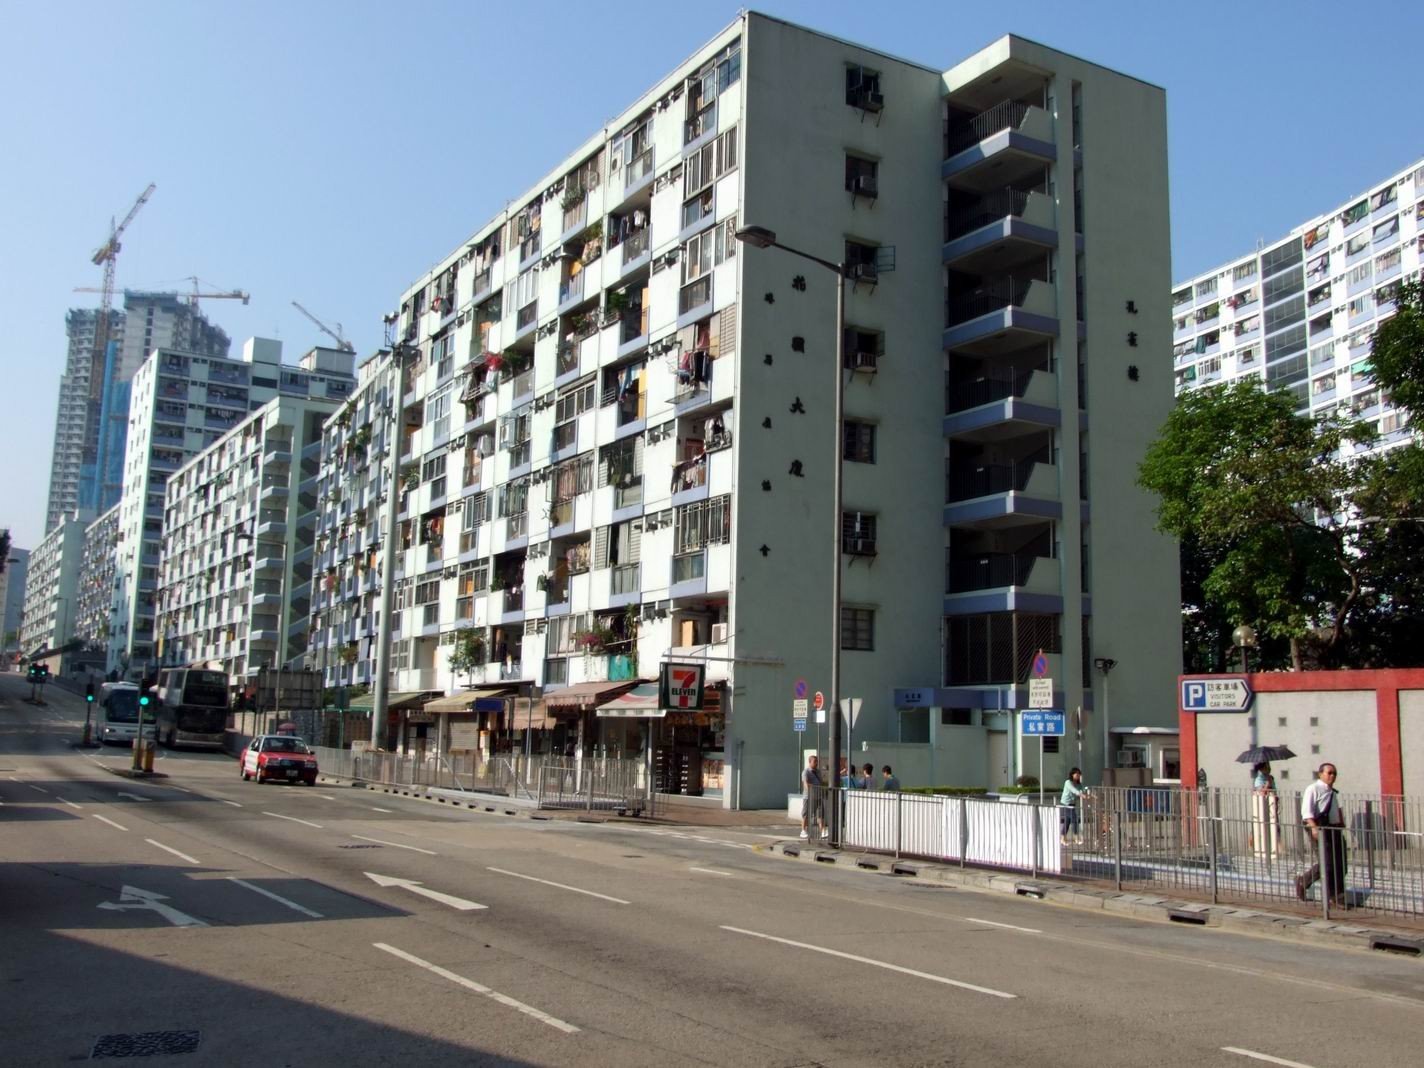 The woman’s body was found in a flat in Kwun Tong Garden Estate. Photo: Handout